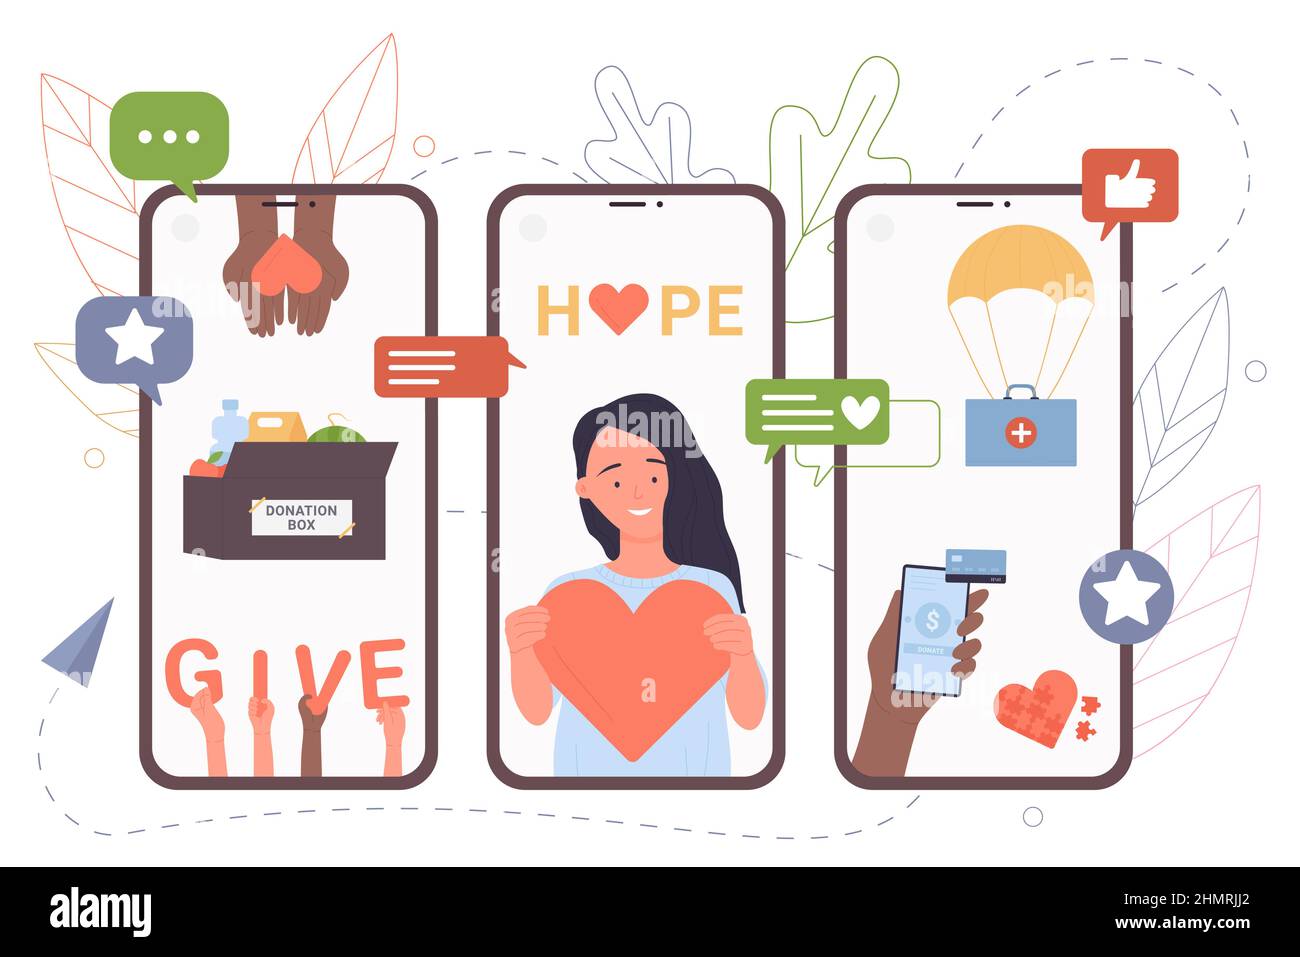 Online donation campaign vector illustration. Cartoon girl volunteer holding heart, hands with mobile phones donating money, medical humanitarian aid and holding give letters. Charity concept Stock Vector